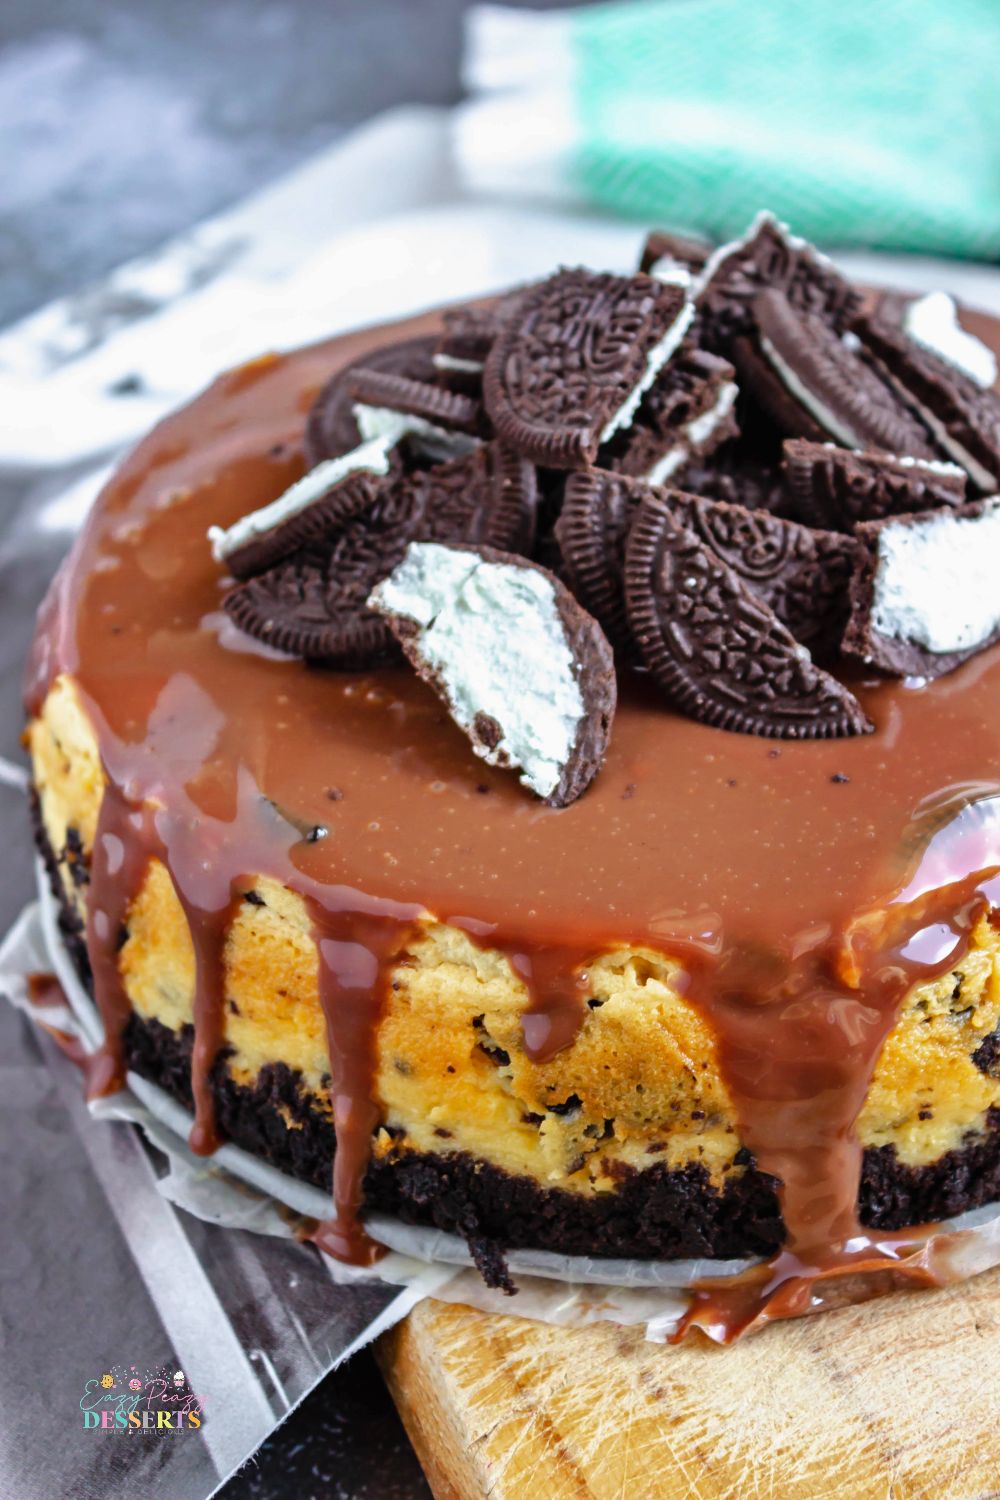 Close up image of Oreo cheesecake with chocolate ganache on top